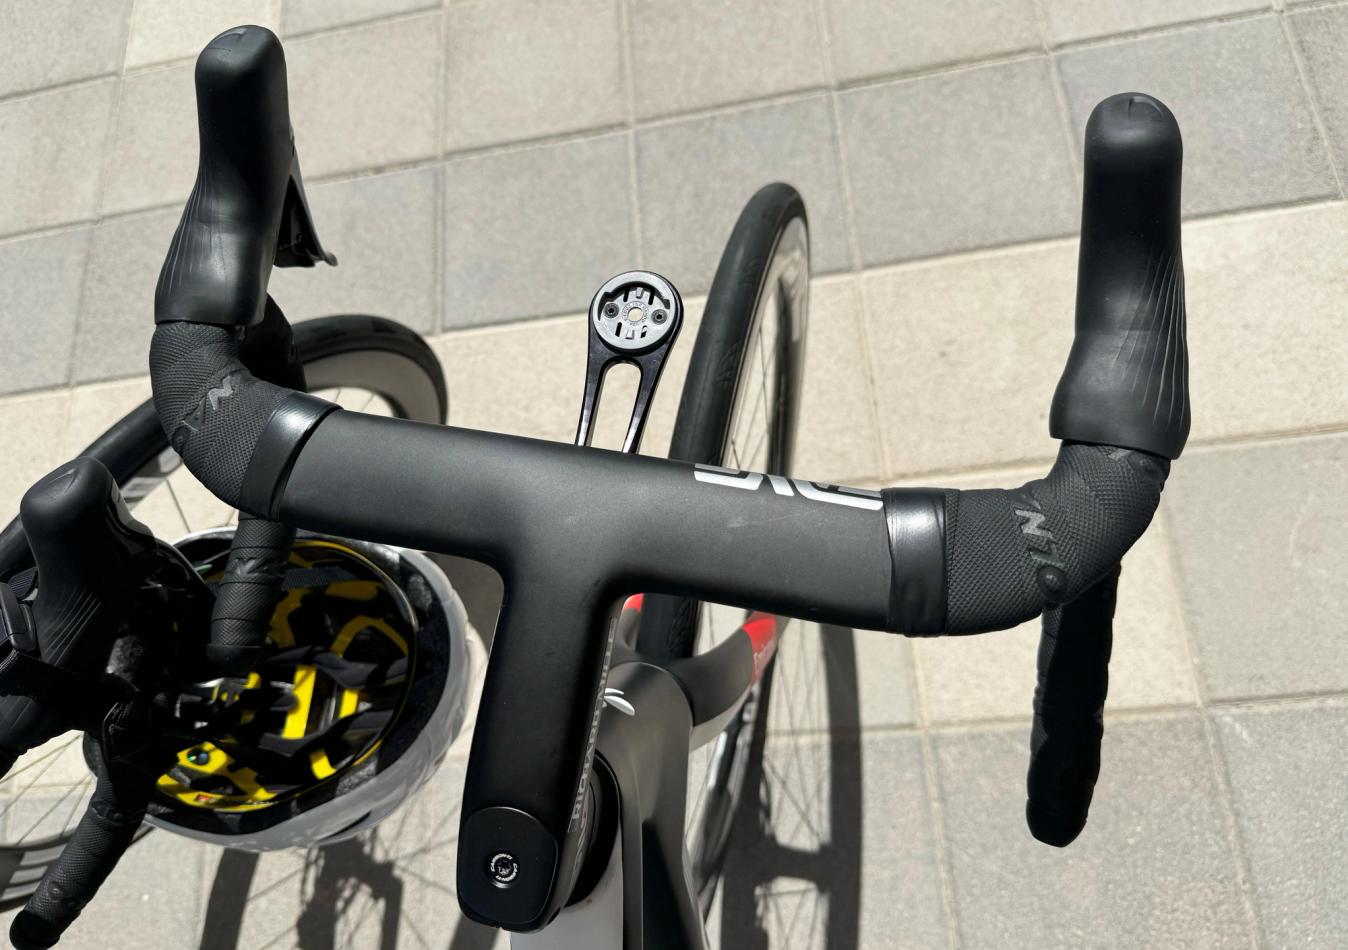 This one-piece handlebar was designed for UAE Team Emirates